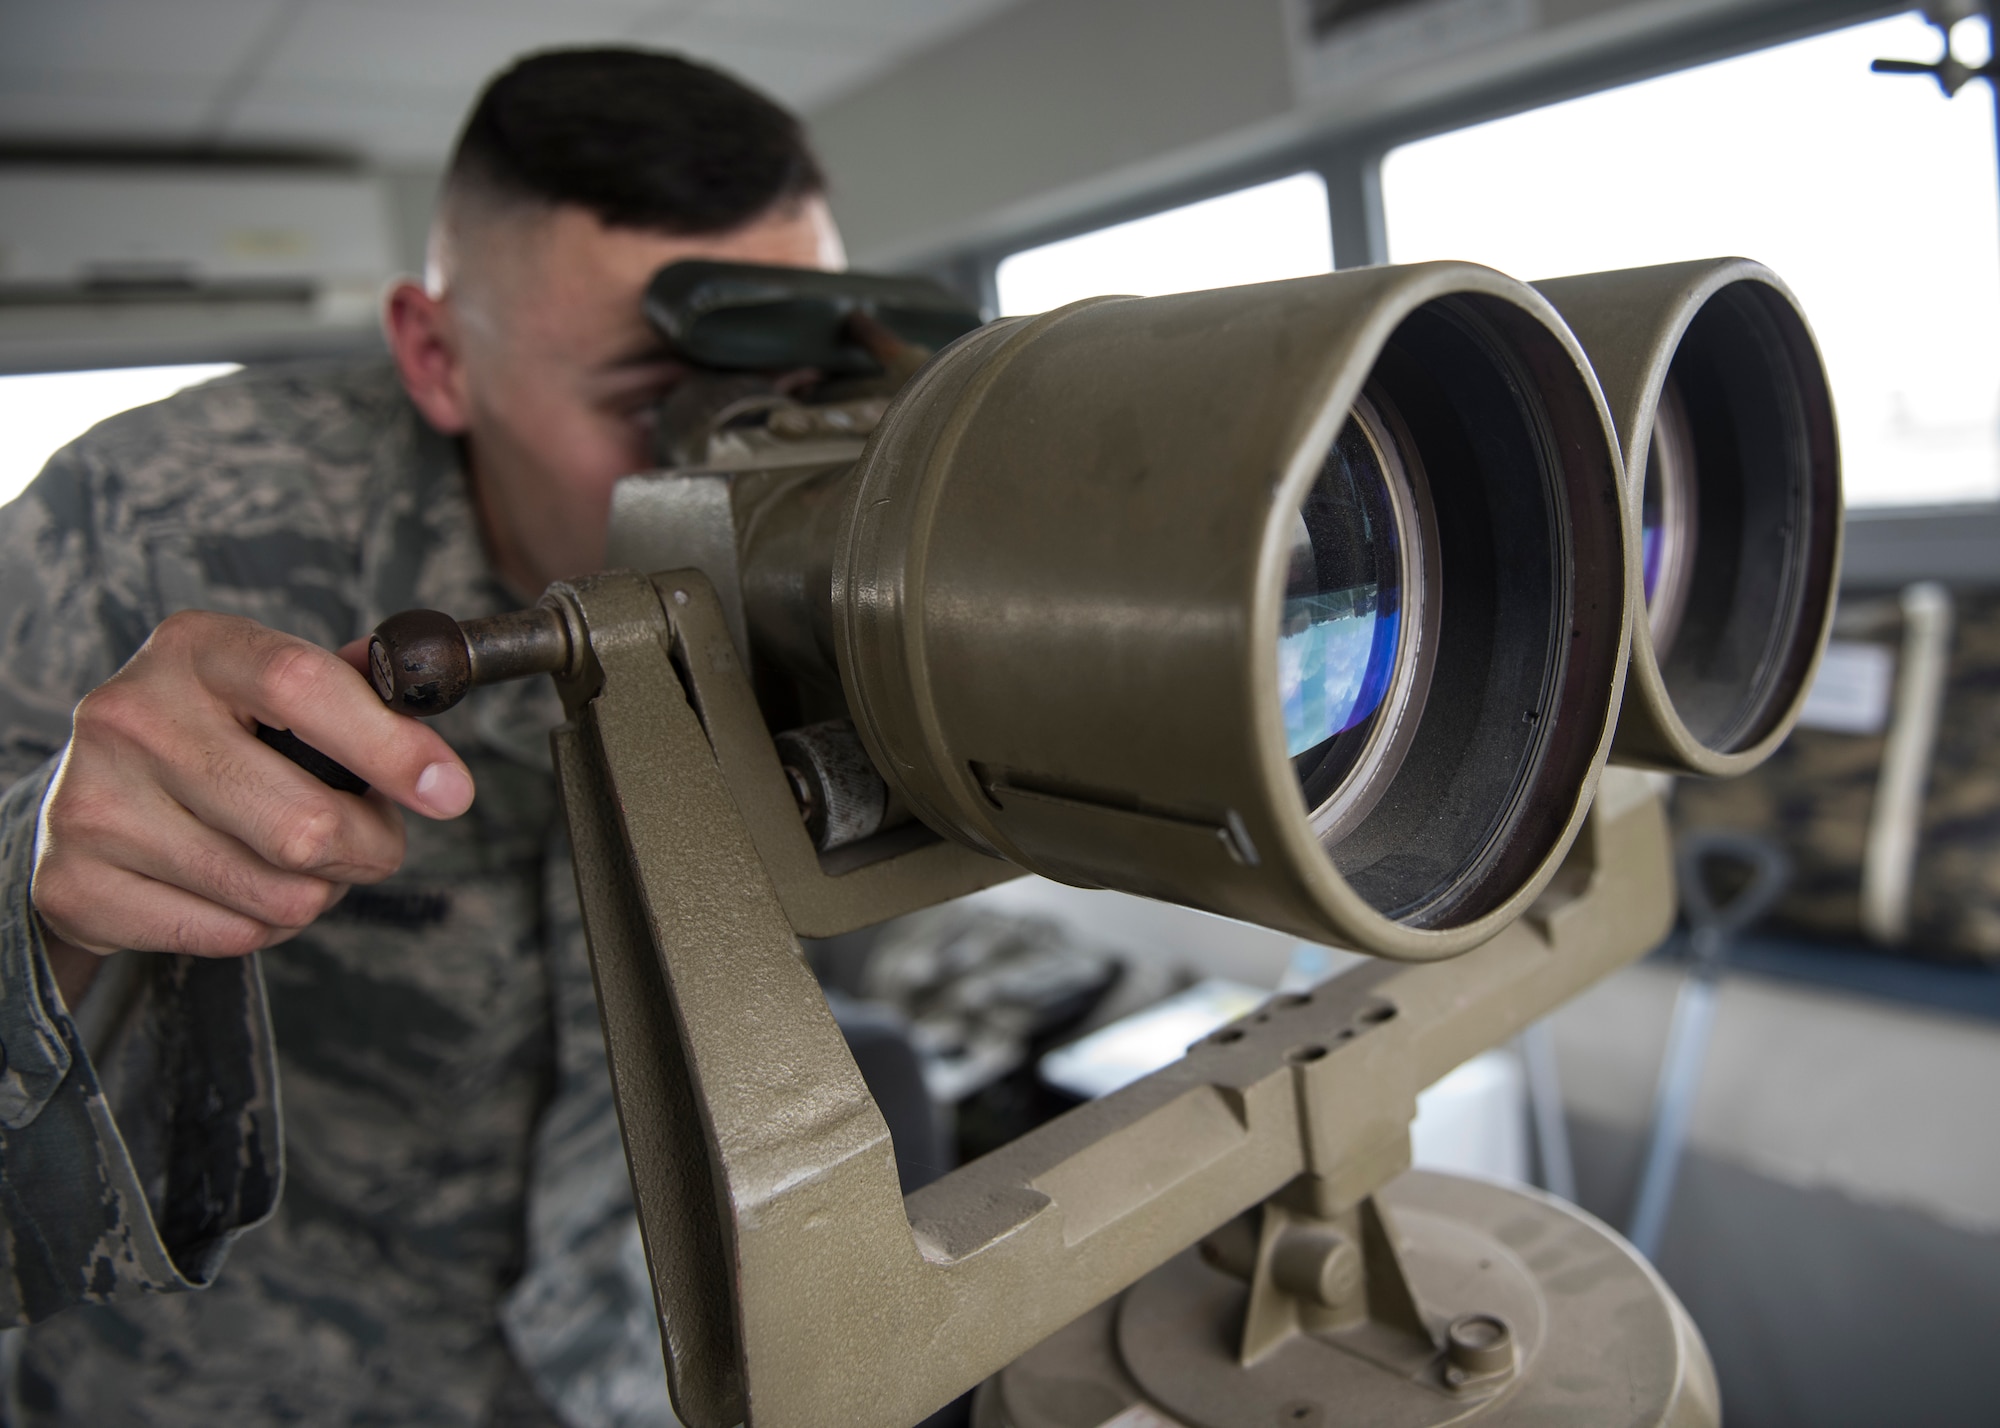 U.S. Air Force Staff Sgt. Cody Hutchison, 39th Security Forces Squadron, looks through binoculars on top of a watch tower at Incirlik Air Base, Turkey, June 21, 2018.